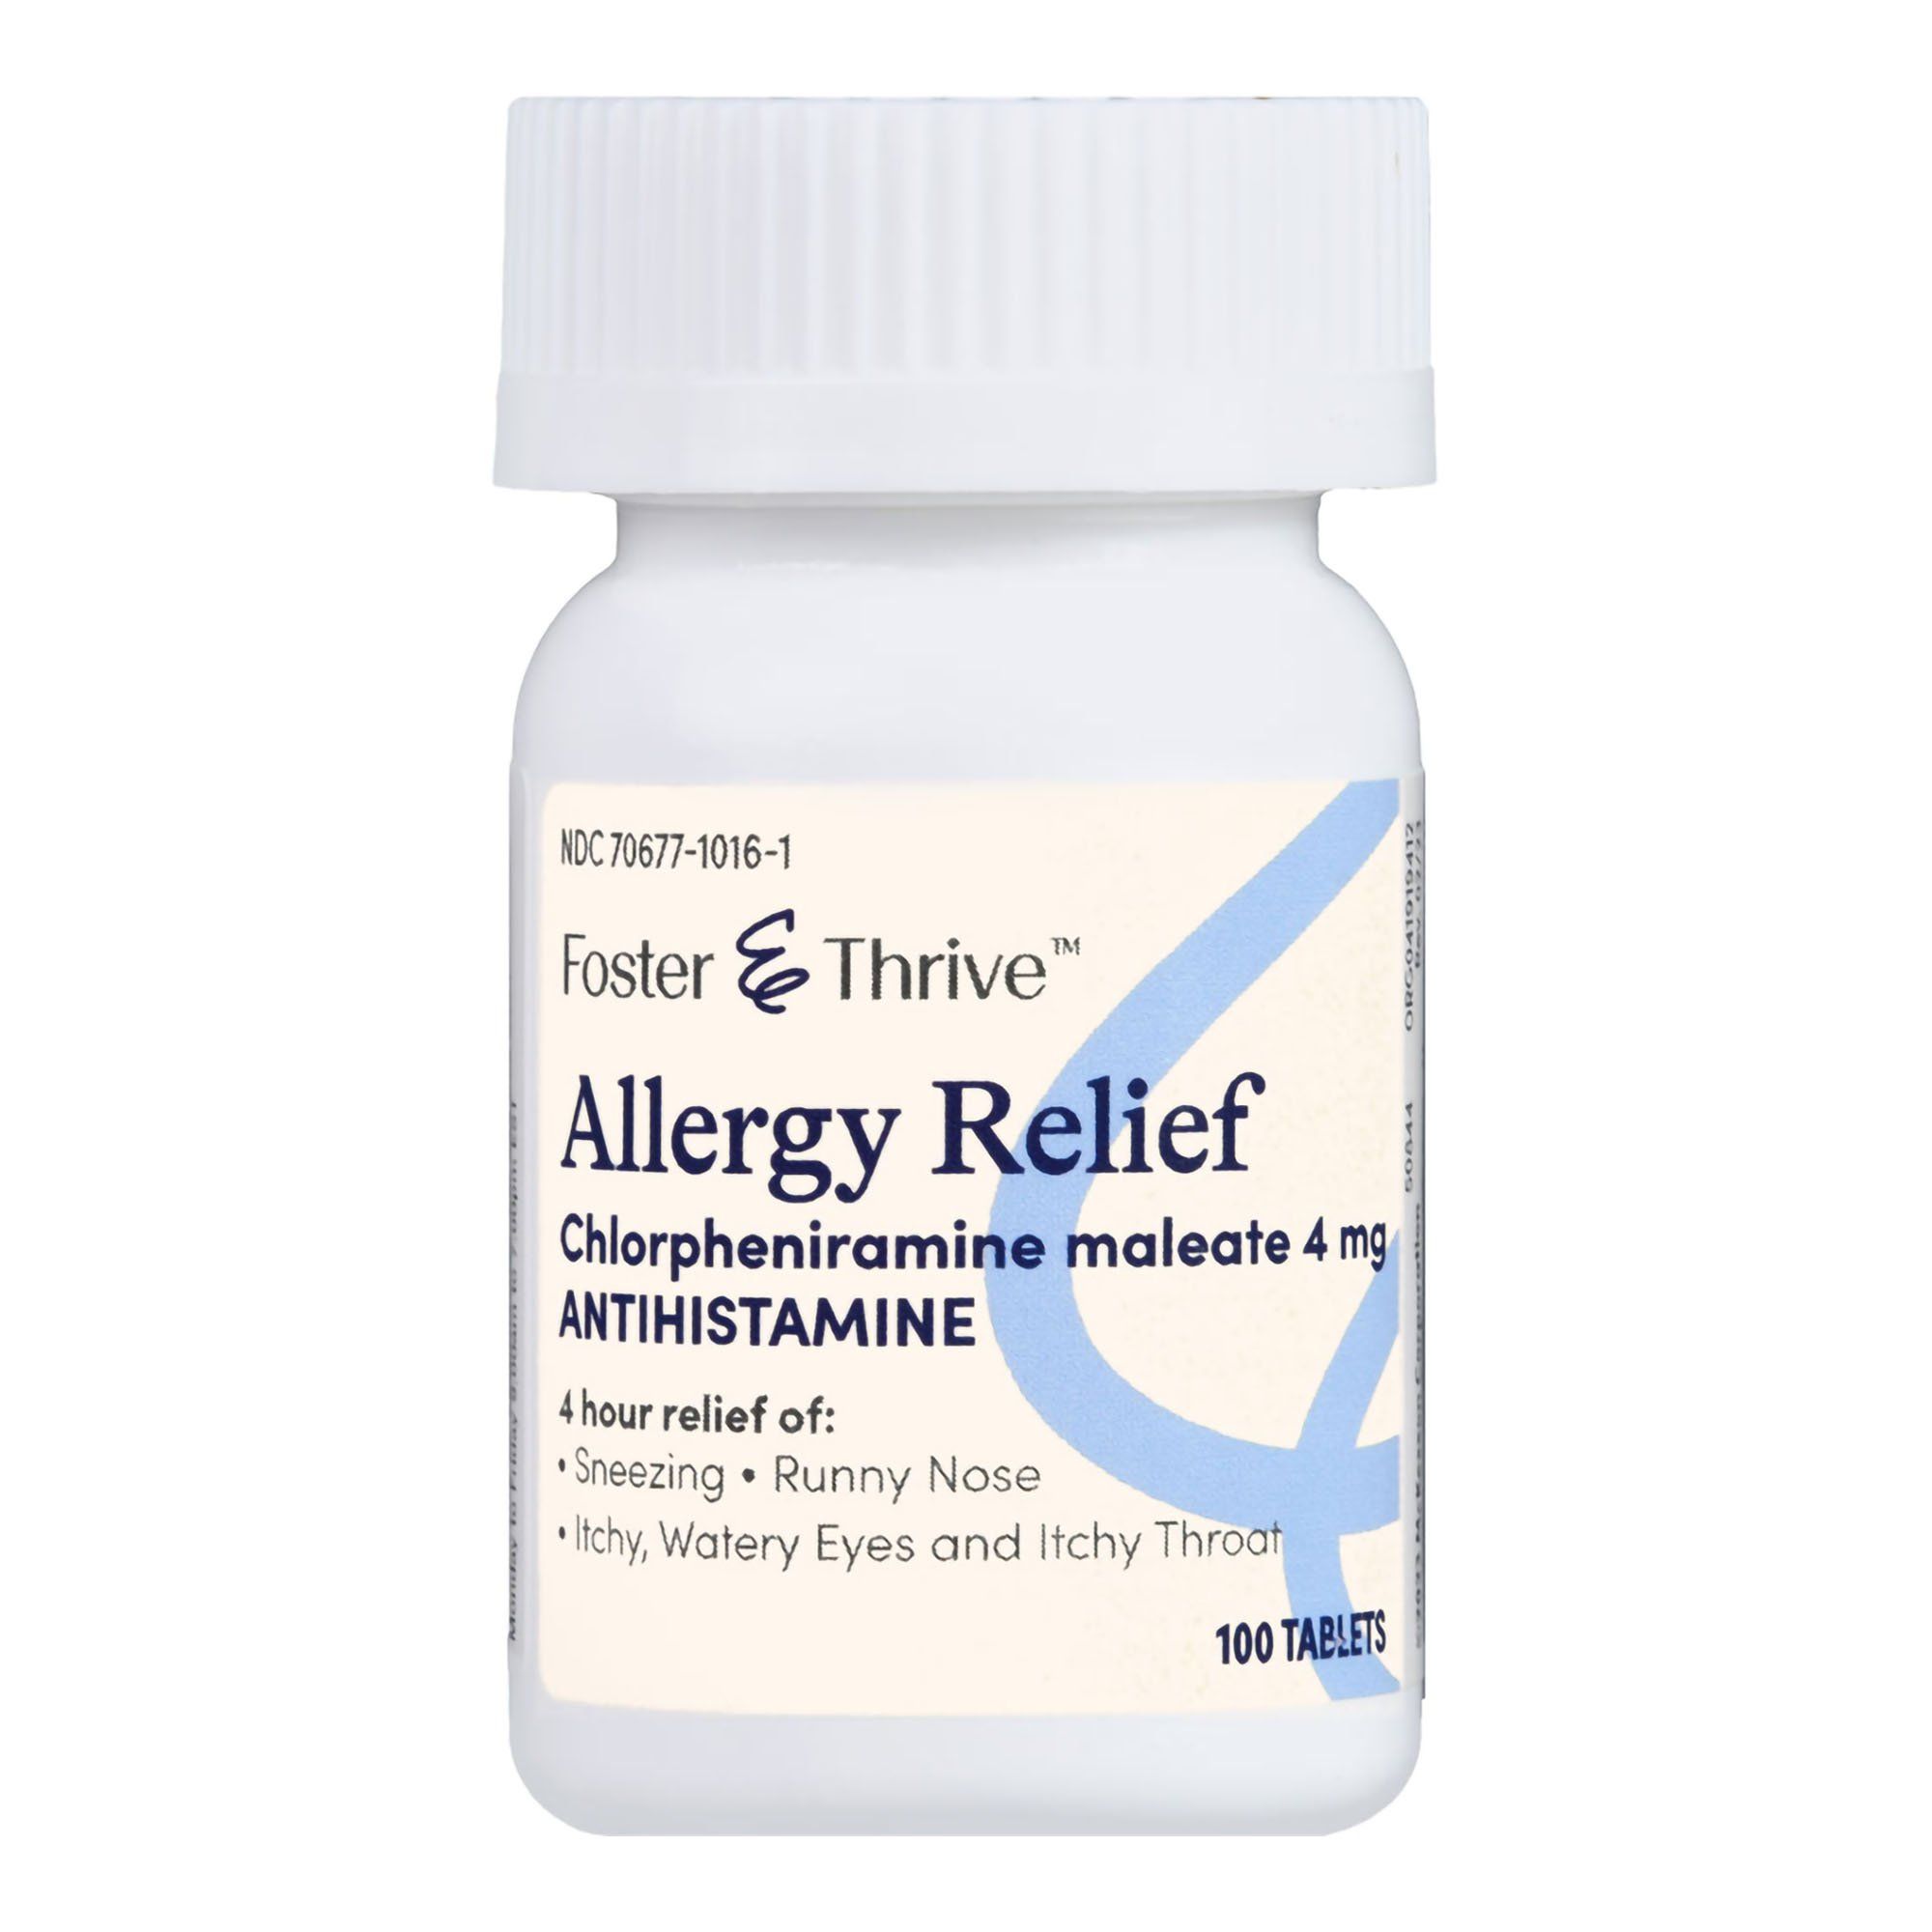 Foster & Thrive Allergy Relief Chlorpheniramine Maleate Tablets,  4 mg - 100 ct